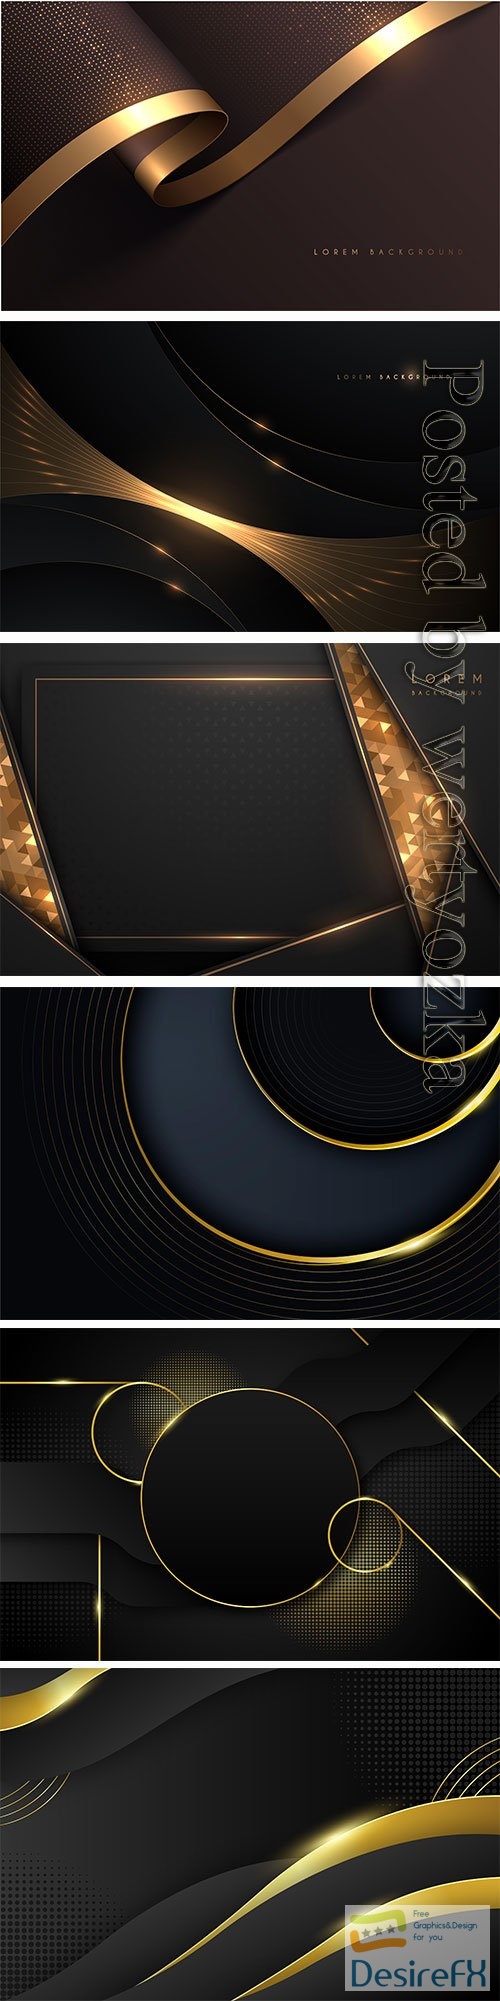 Luxury black abstract background with golden lines